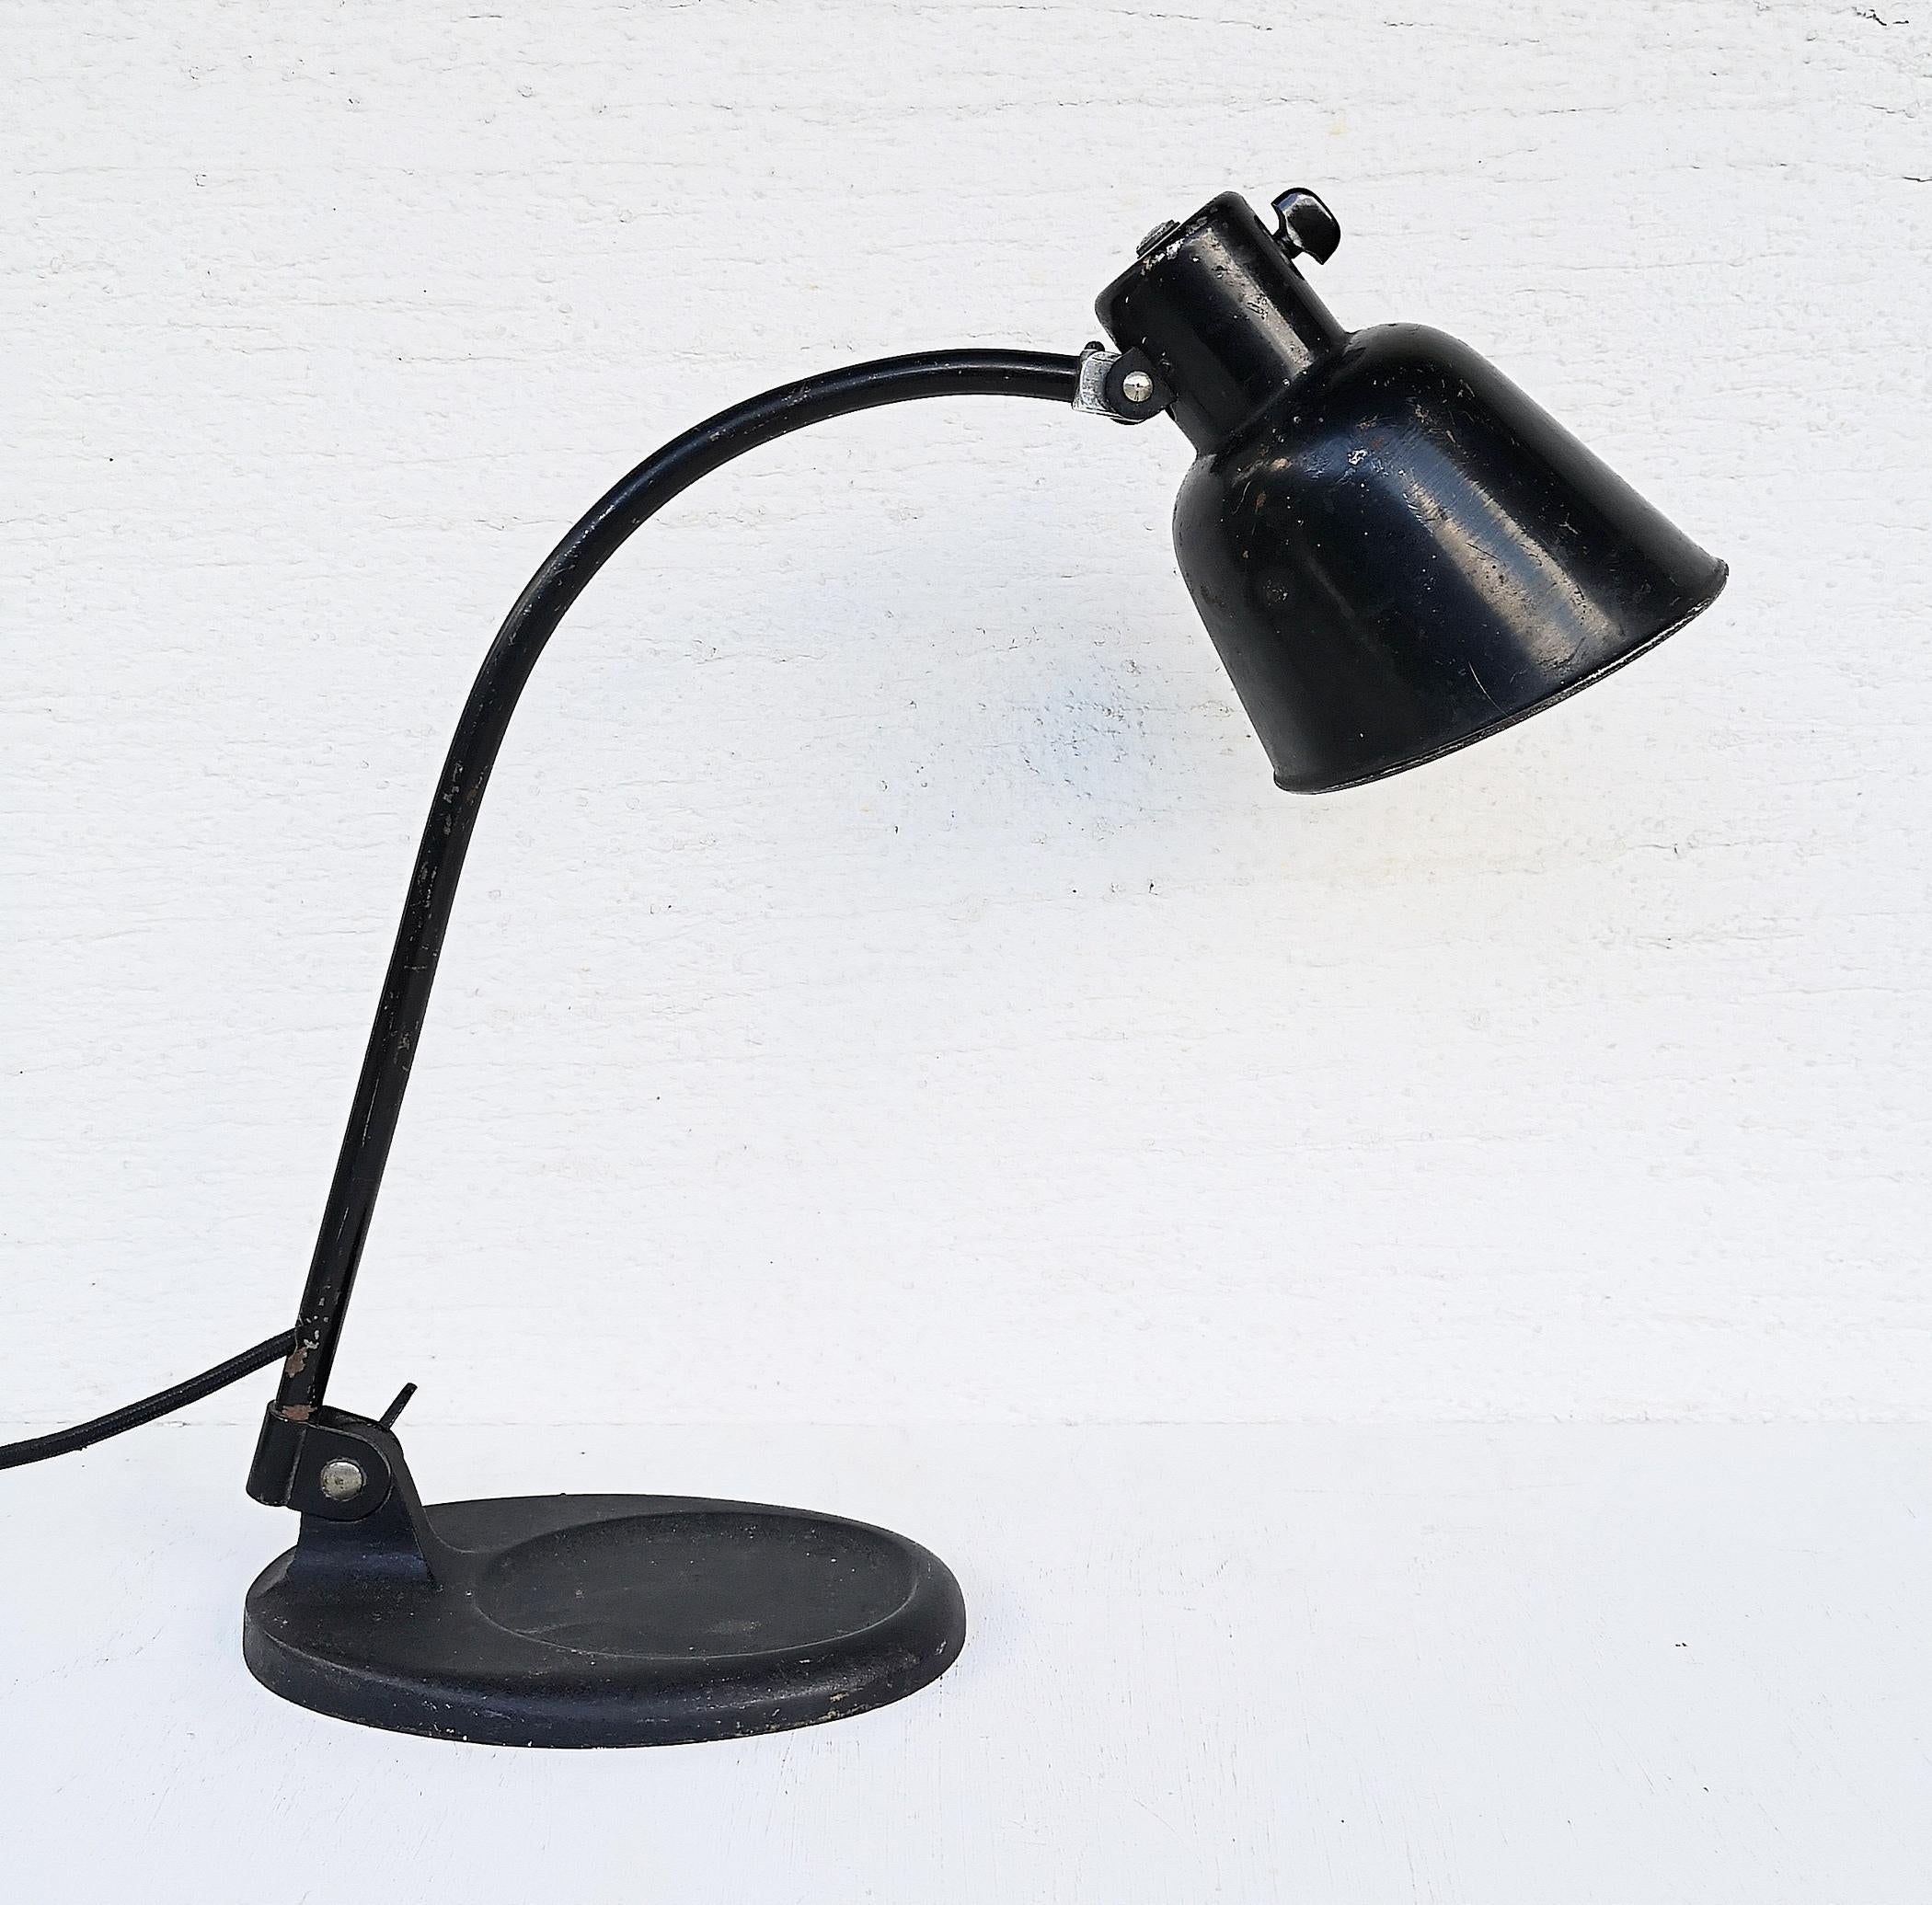 Great industrial desk lamp by Christian Dell. Model 2768 Matador Bur. Produced by the Bauhaus in the 30s. This is a vivid representative of the Bauhaus.
Christian Dell is a jeweler and designer from Germany. Years of life - 1893-1974. He was a